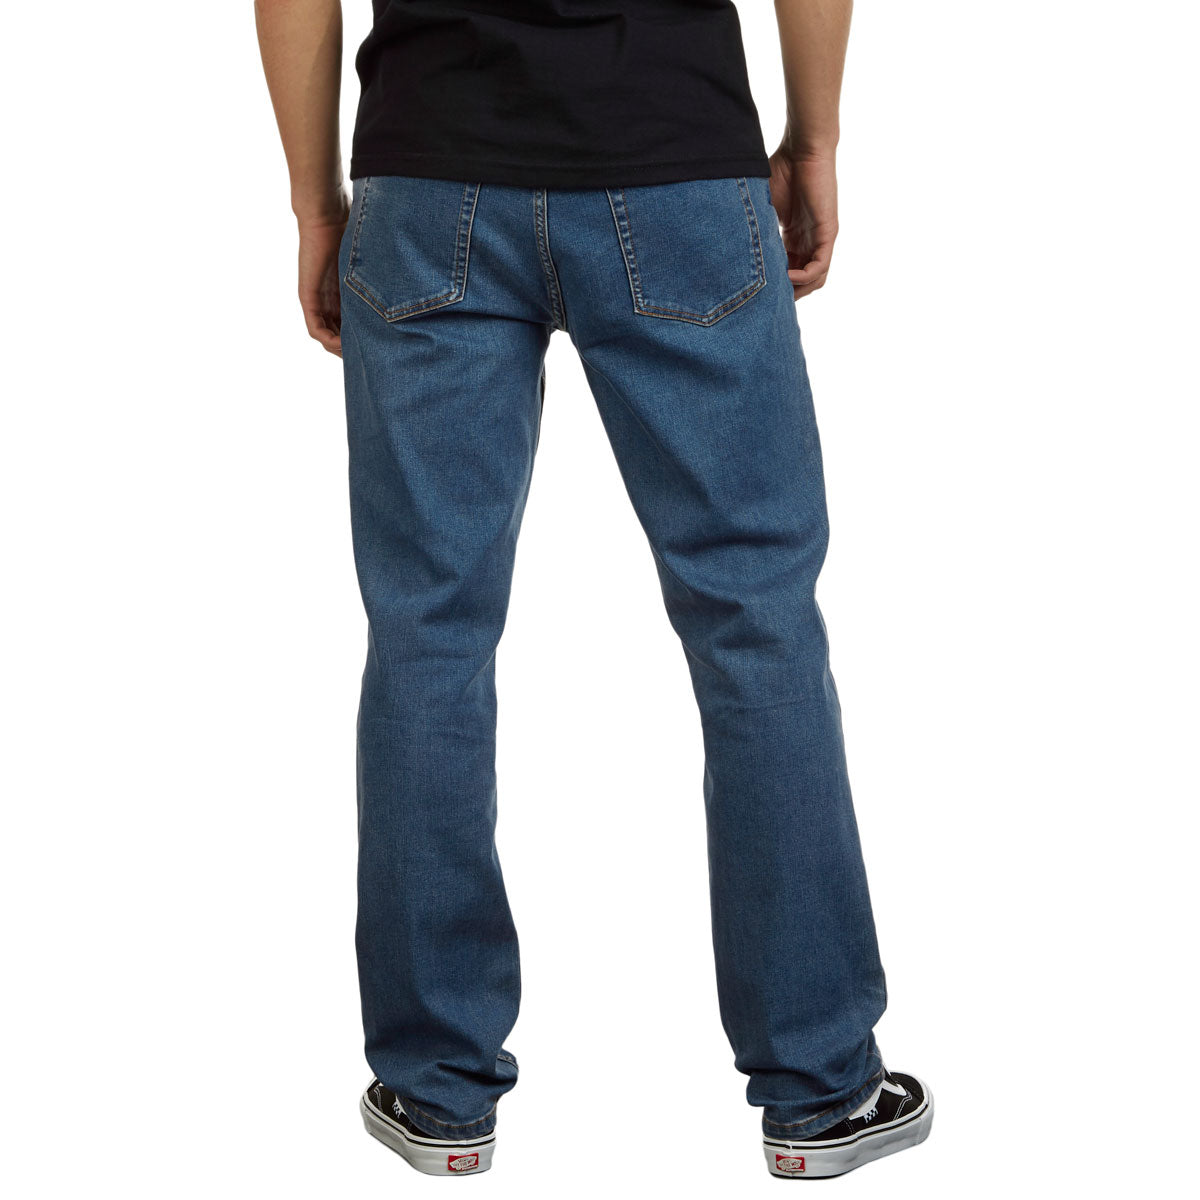 CCS Standard Plus Relaxed Denim Jeans - New Rinse